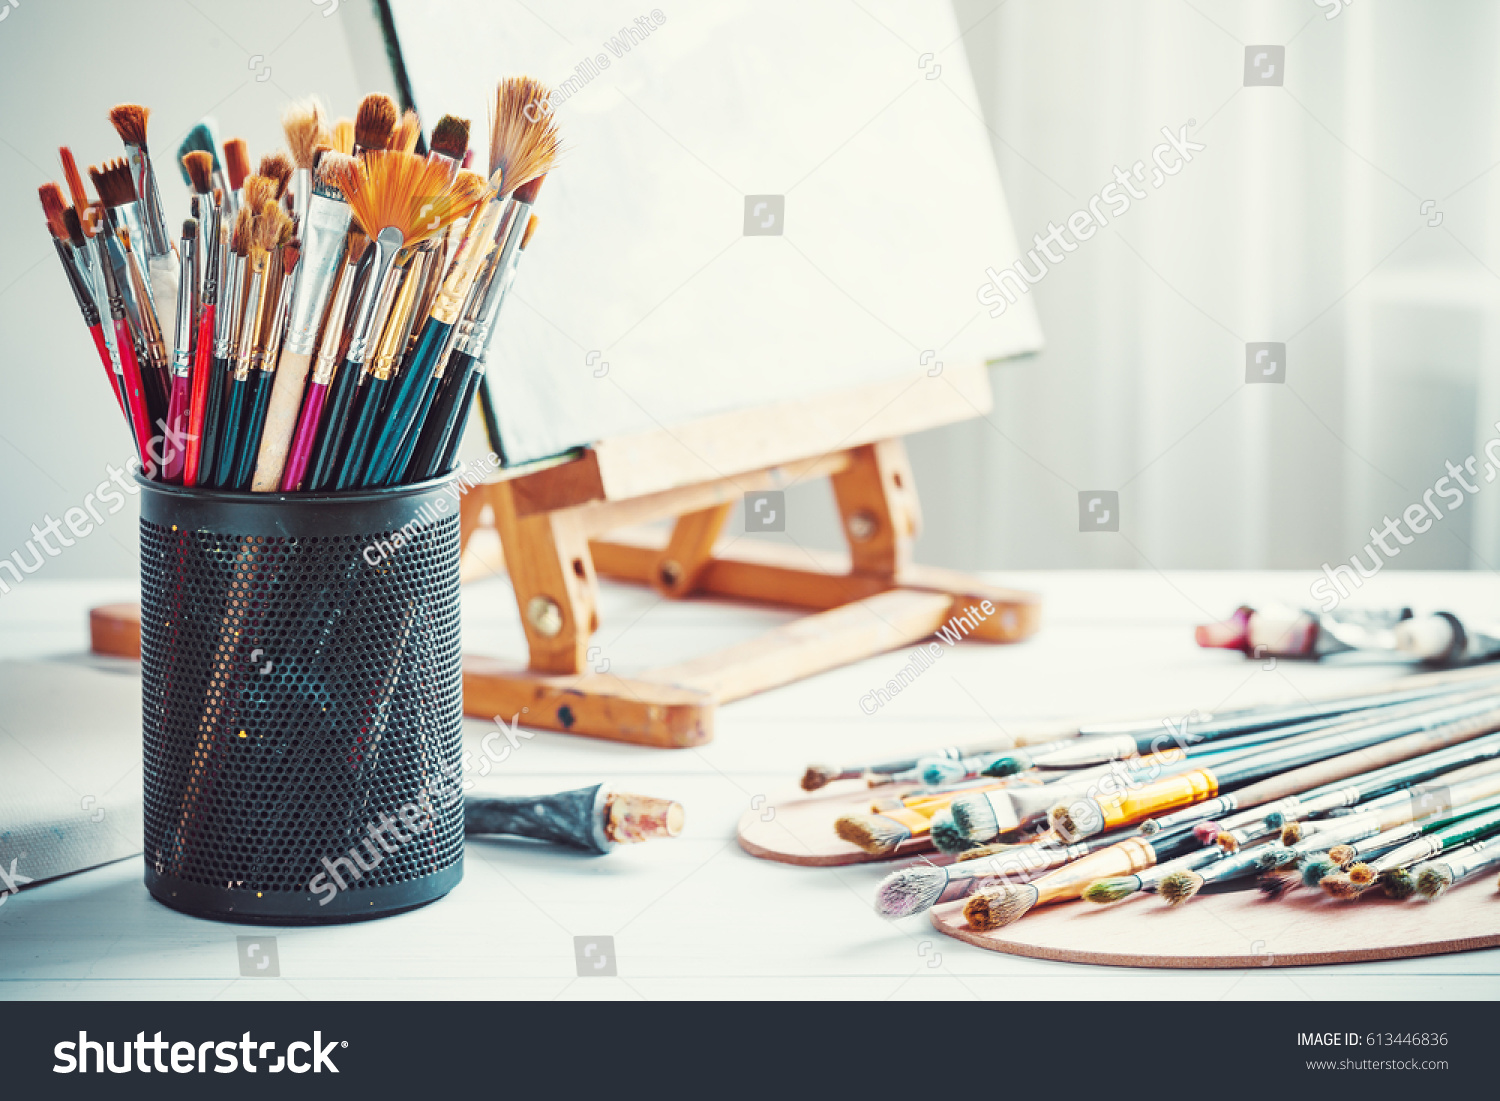 Artistic equipment: easel, paint brushes, tubes of paint, palette and paintings on work table in a artist studio. #613446836